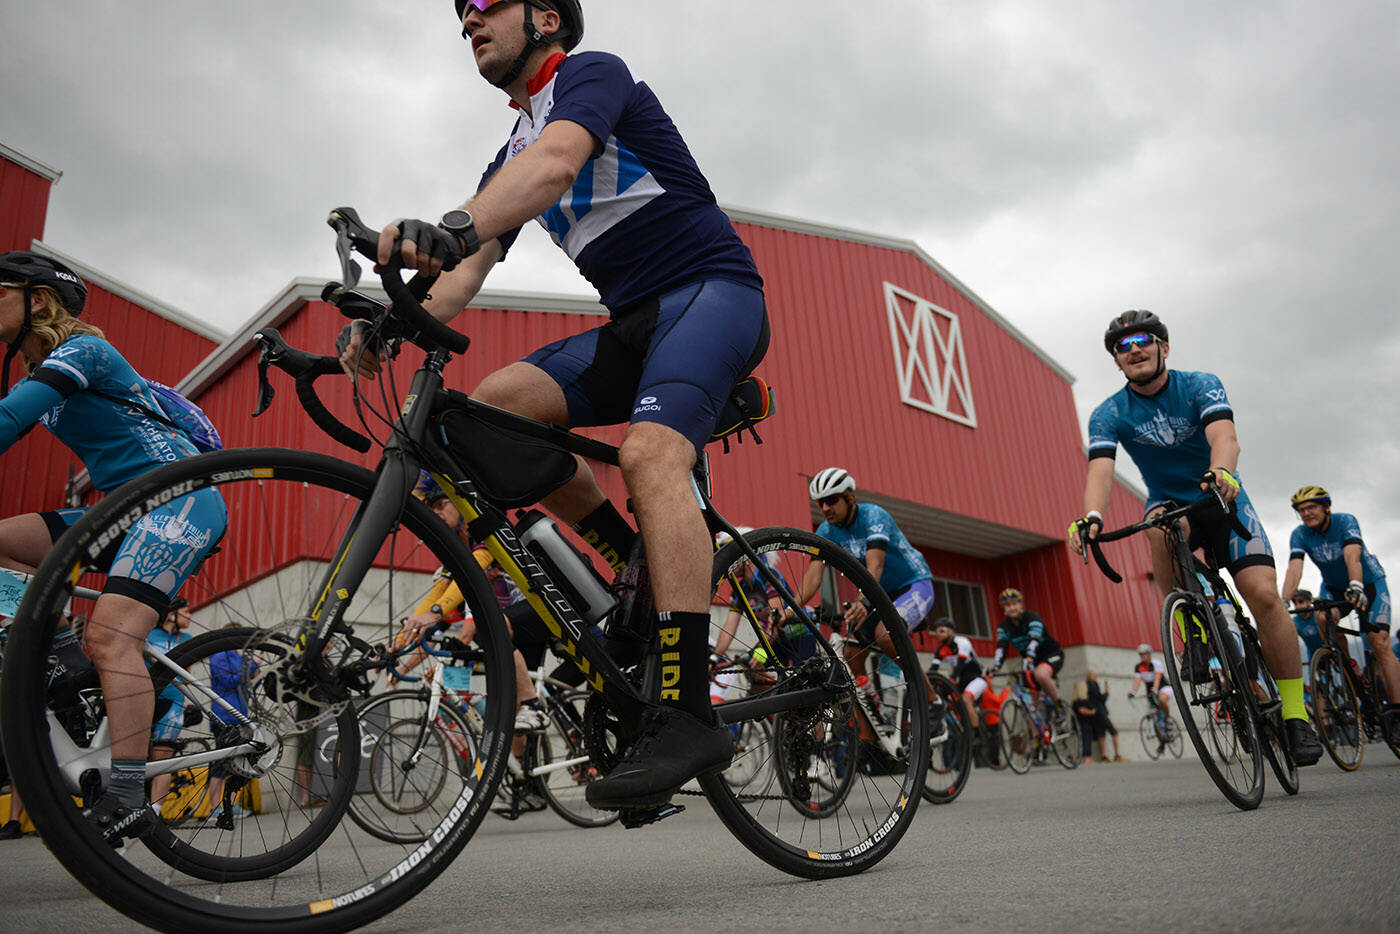 More than 1,100 cyclists leave Chilliwack Heritage Park for the annual Tour de Cure fundraiser for BC Cancer Foundation on Saturday, Aug. 27, 2022. (Jenna Hauck/ Chilliwack Progress file)